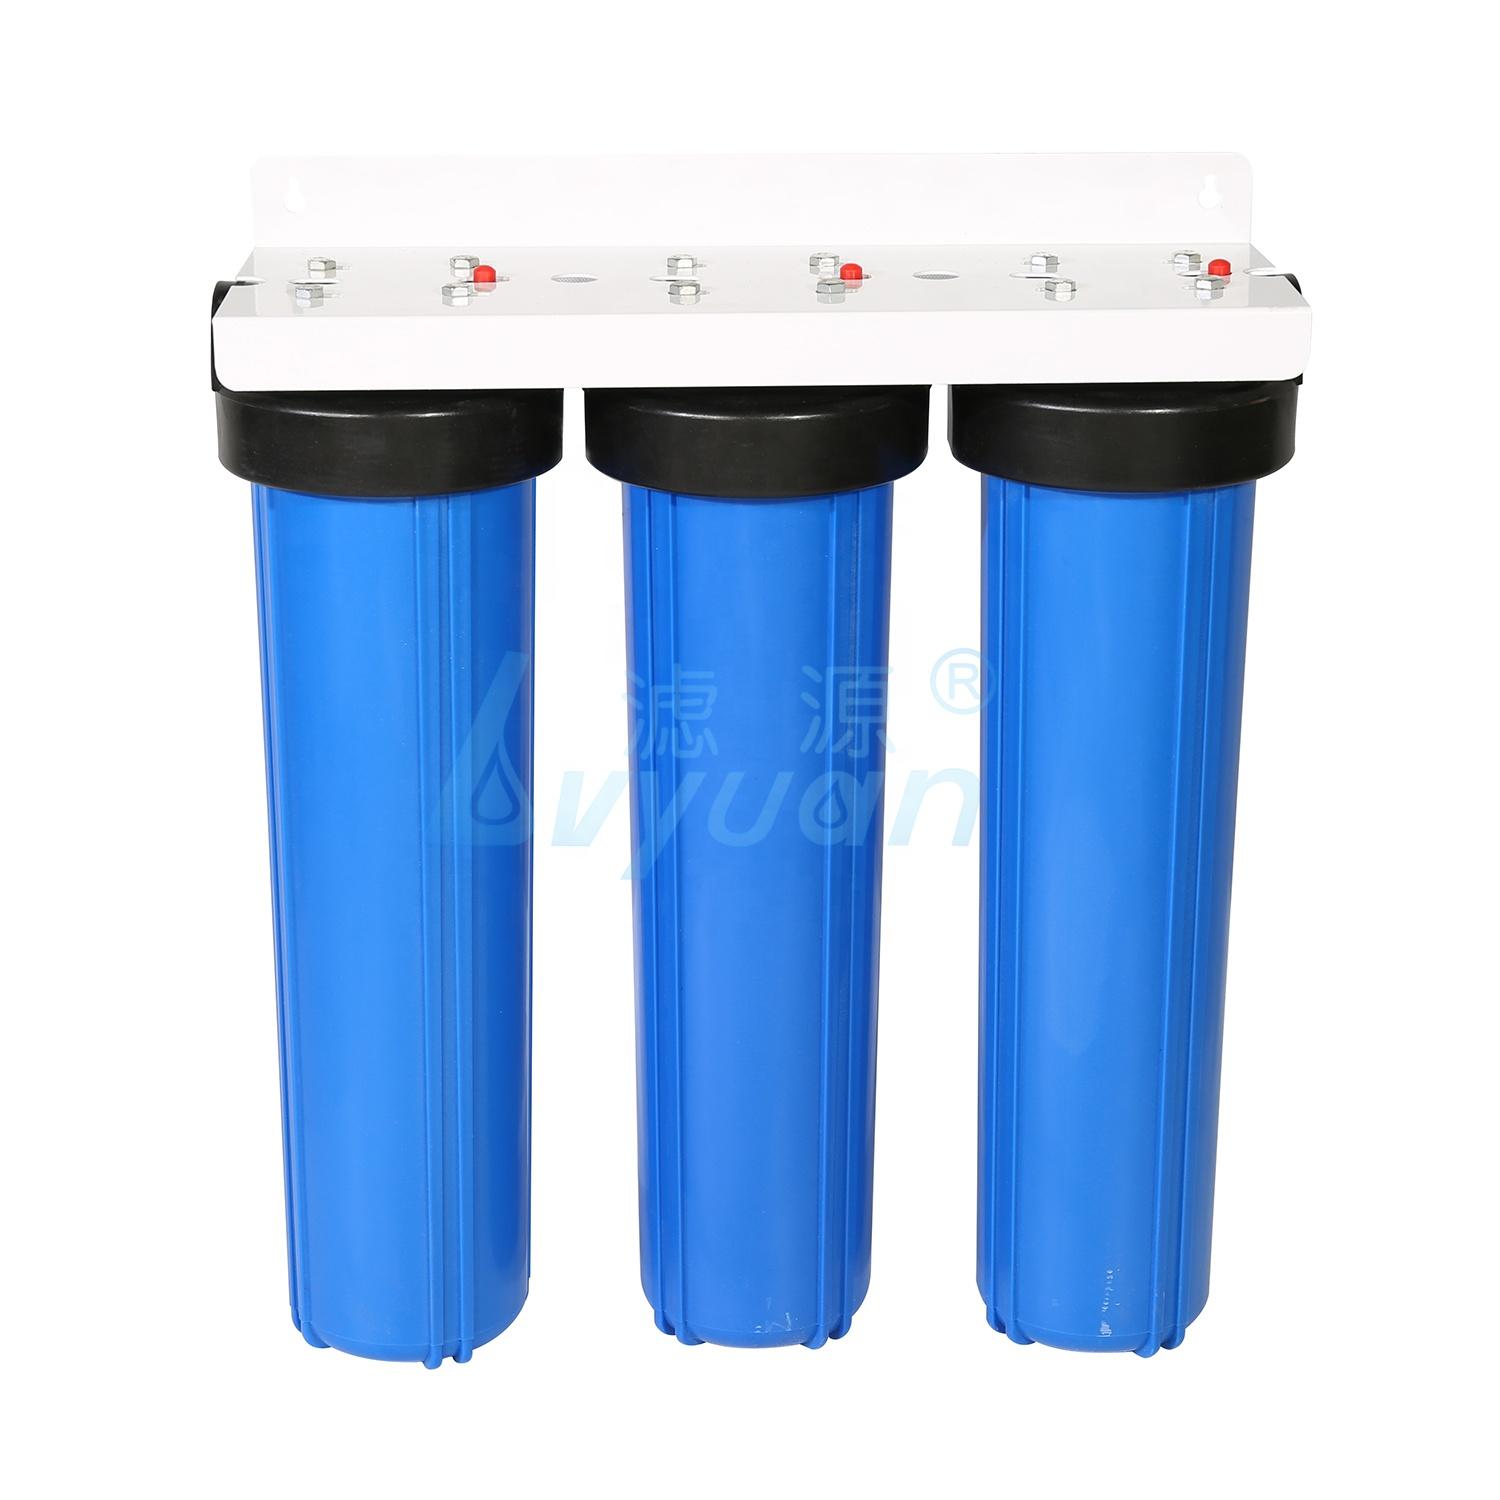 HOT SALE 10 inch big blue /clear filter housing for pp water filter 20 pcs/ctn